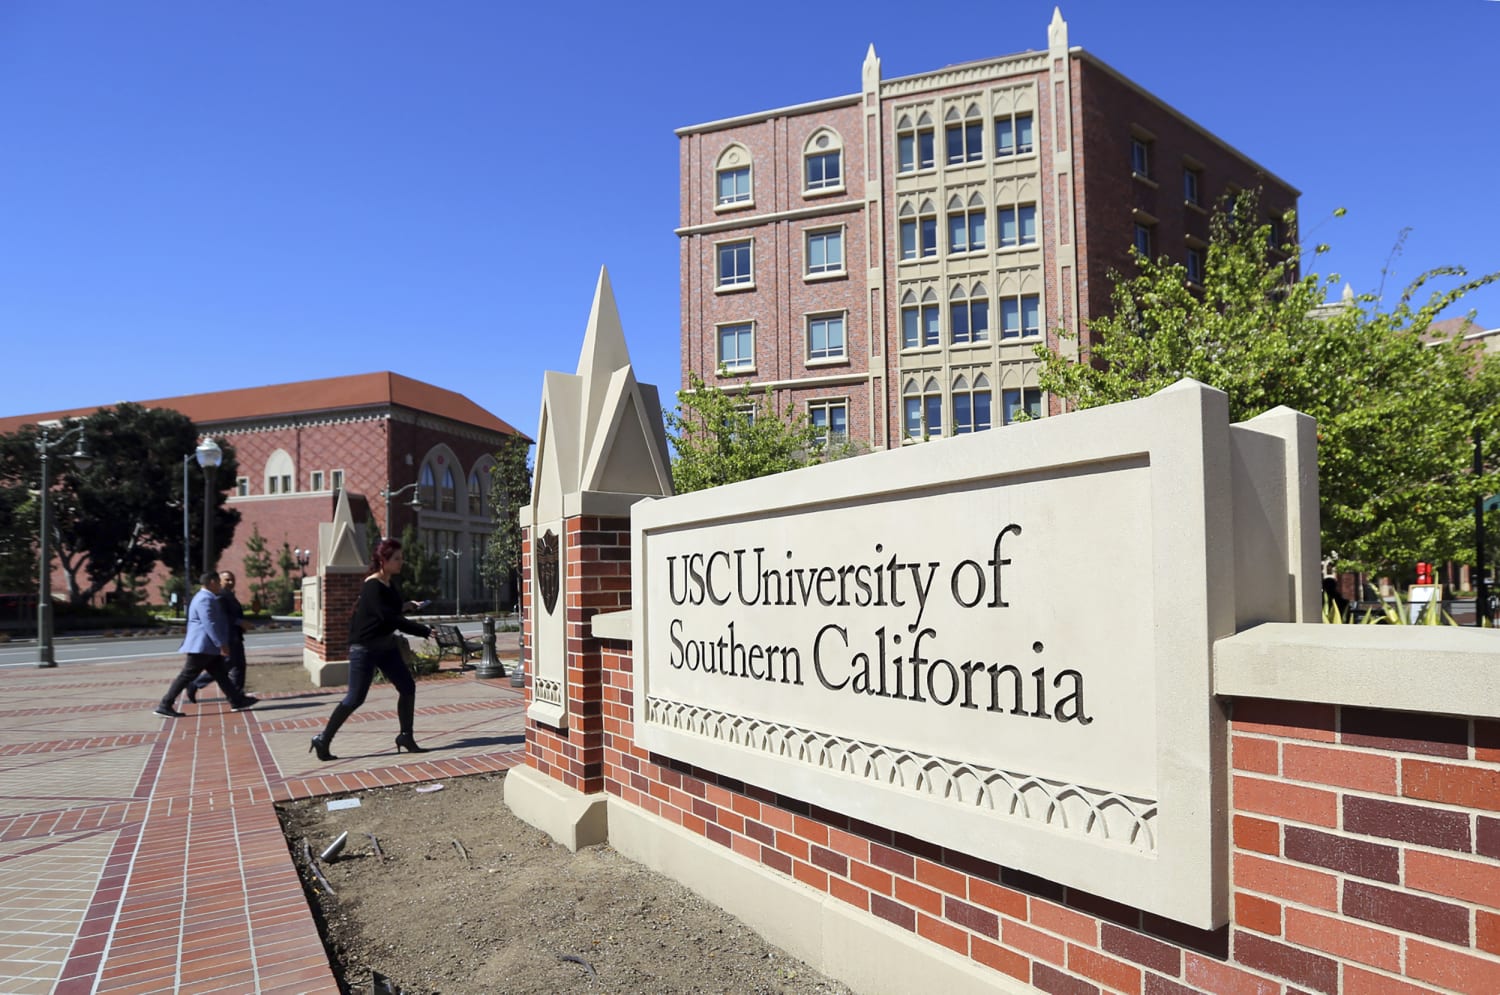 USC announces free tuition for families making under $80,000 a year